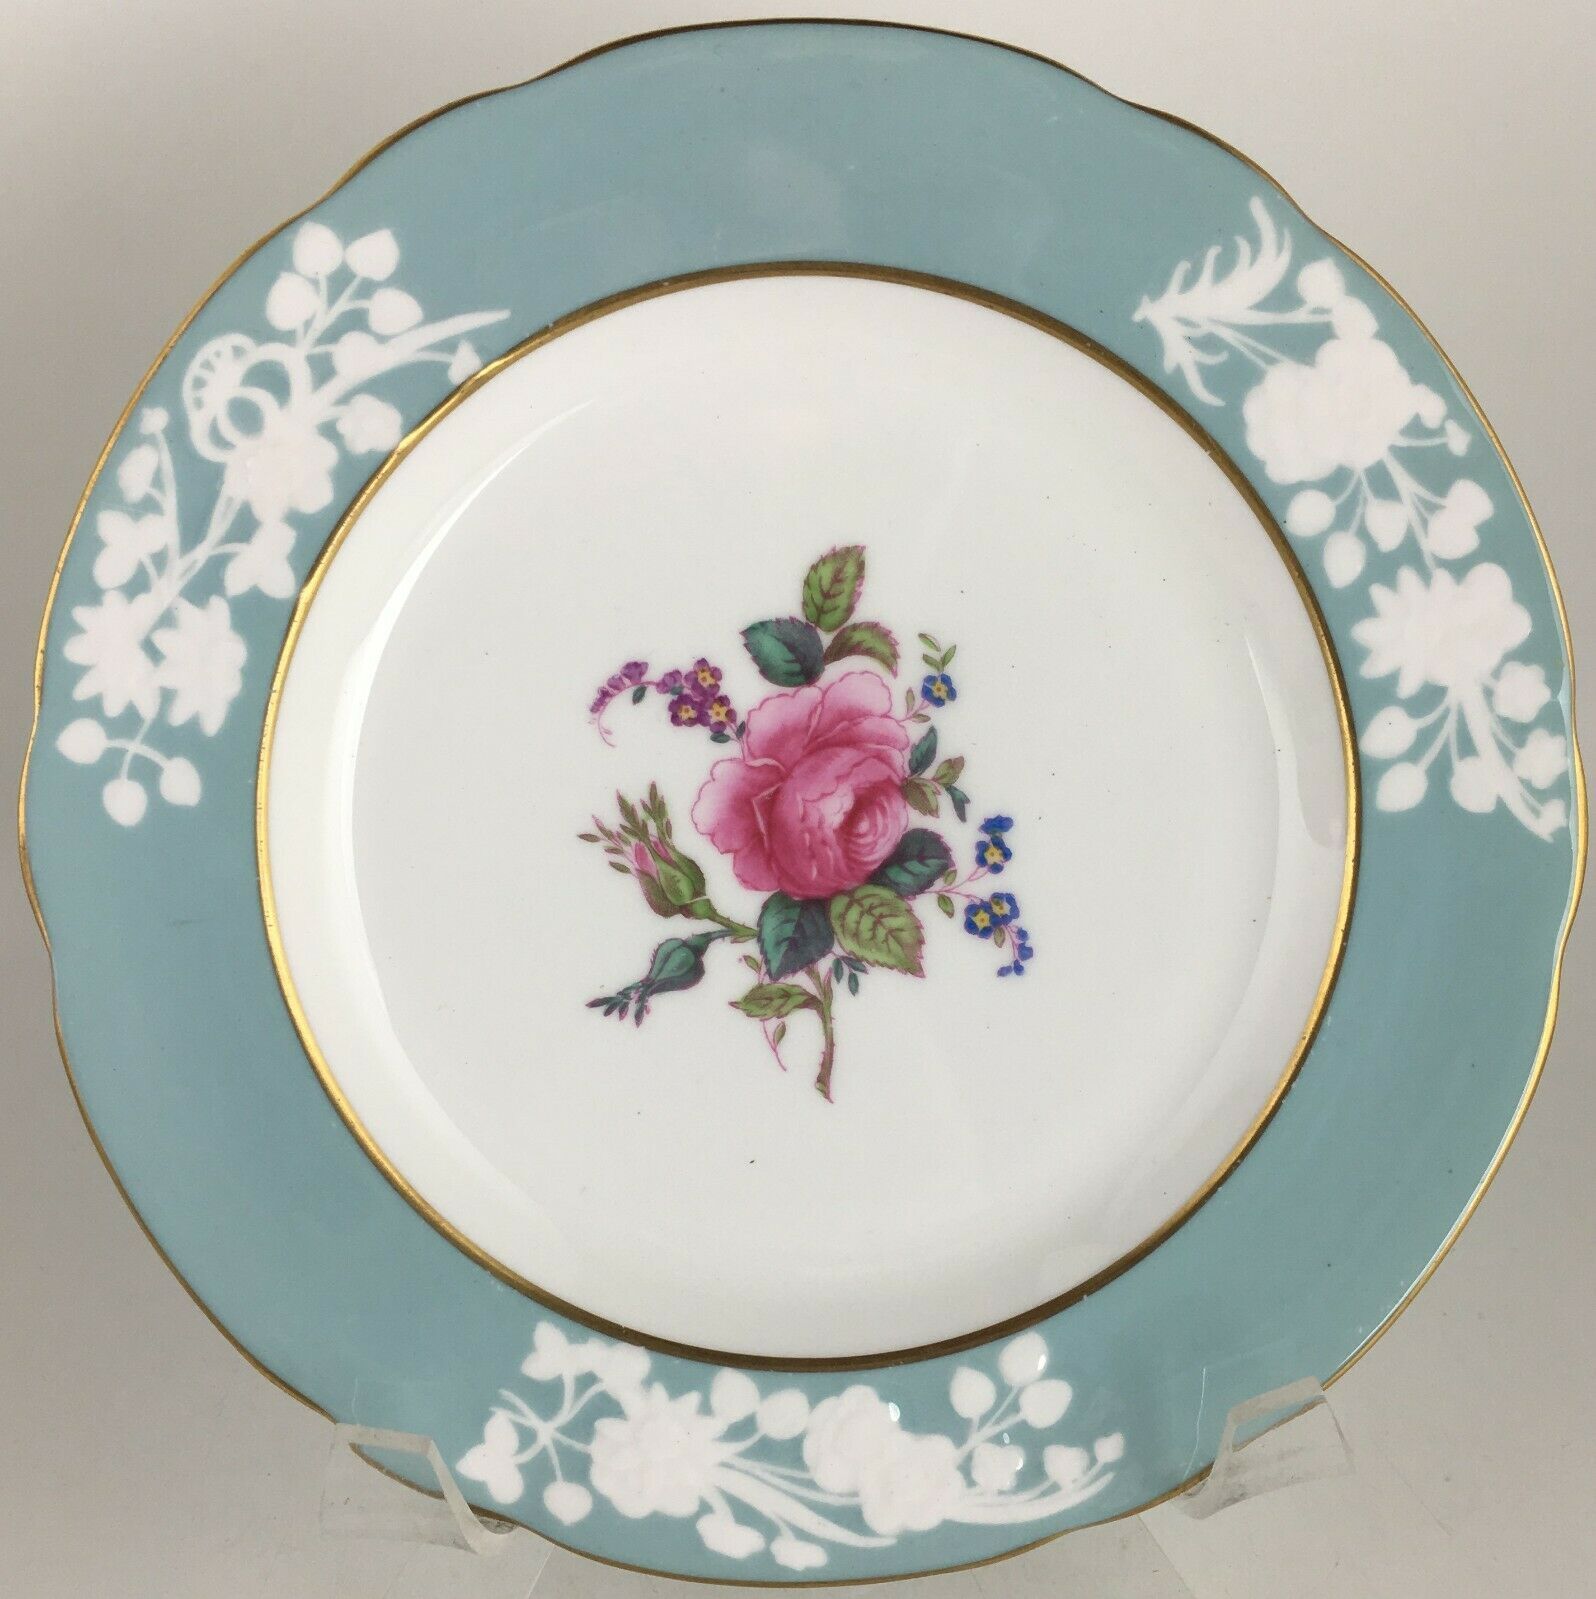 Spode Old Colony Rose Y6447 Pie Plate - $15.00